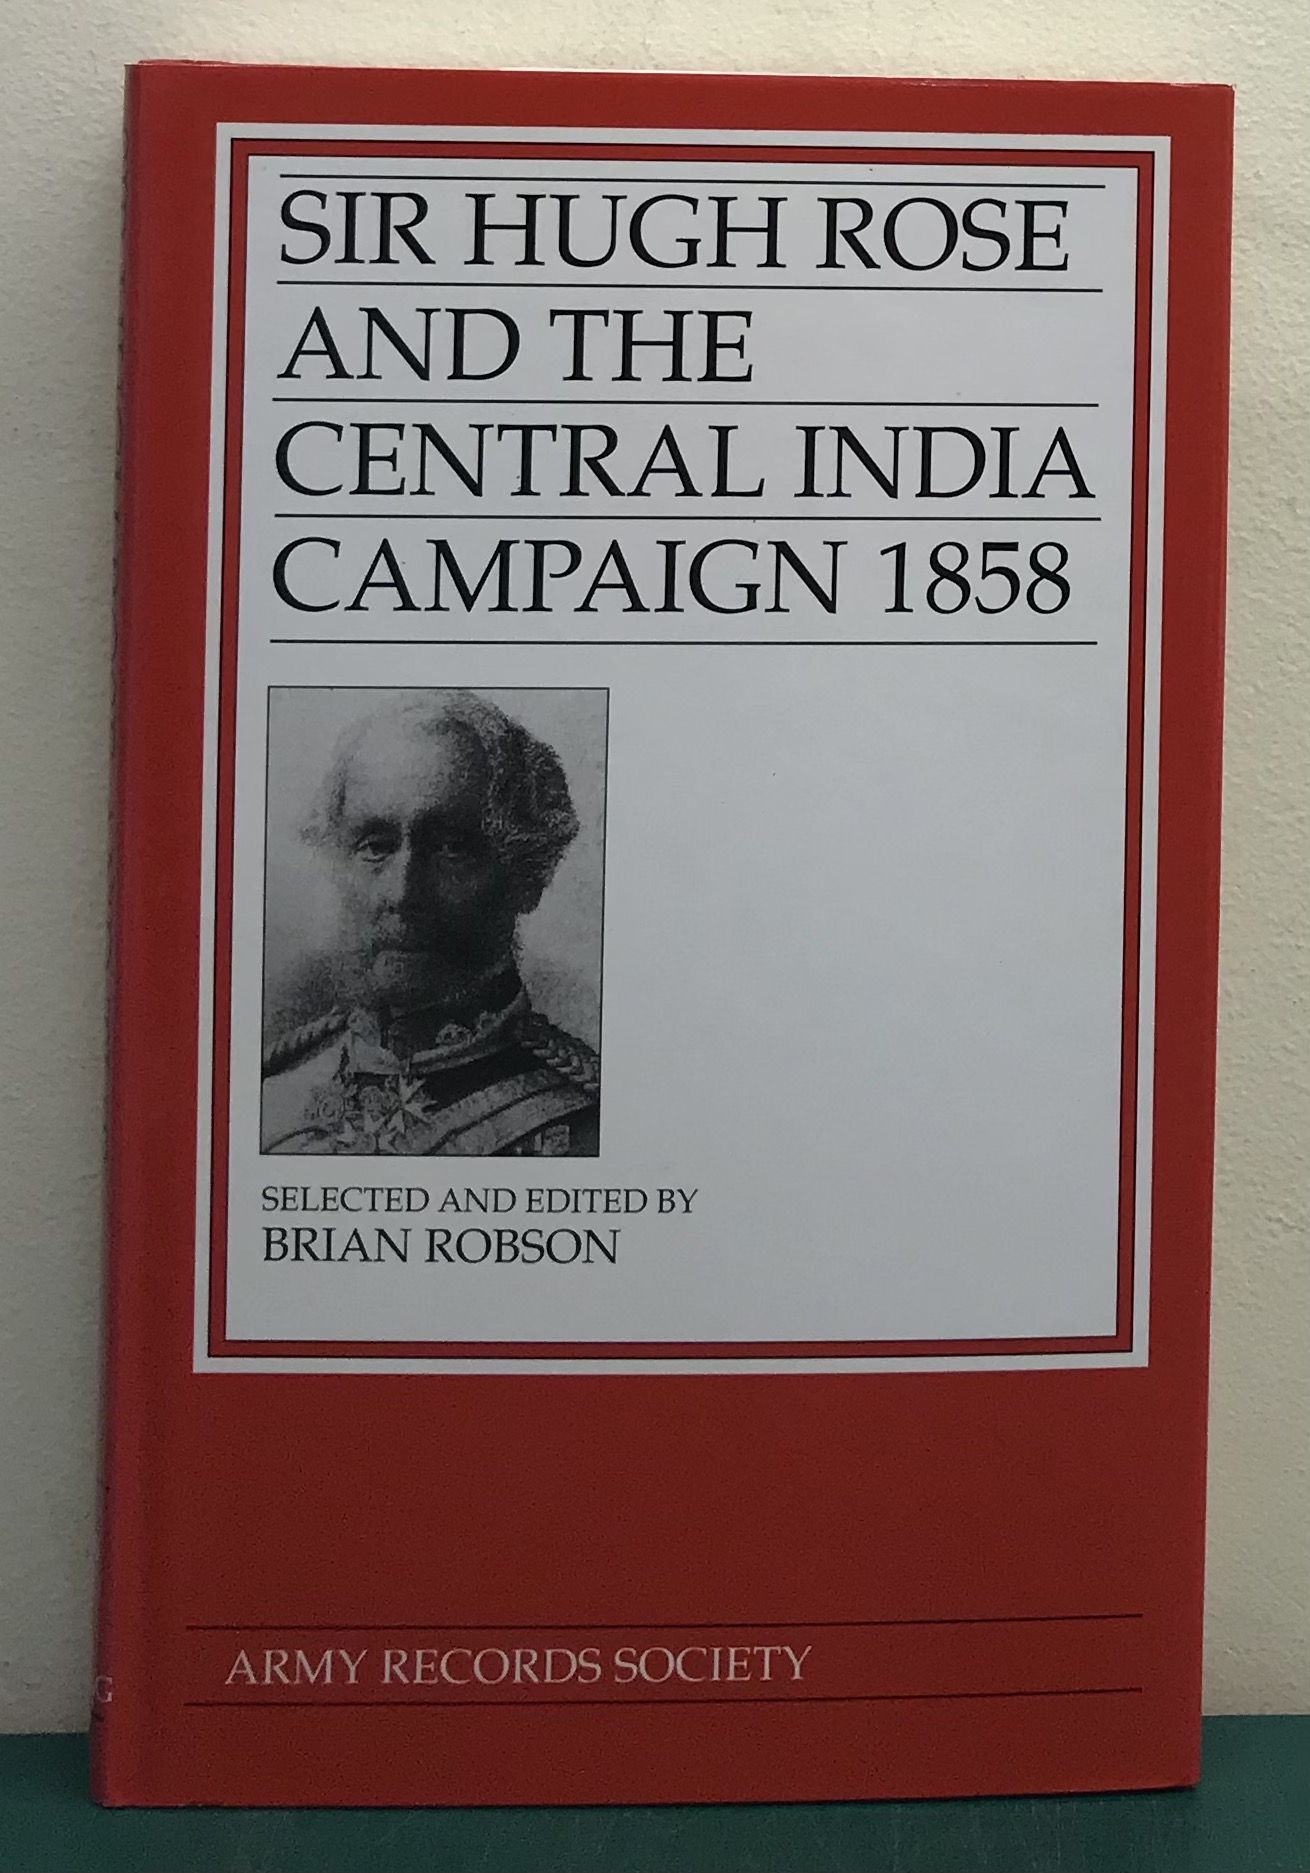 Sir Hugh Rose and The Central India Campaign 1858